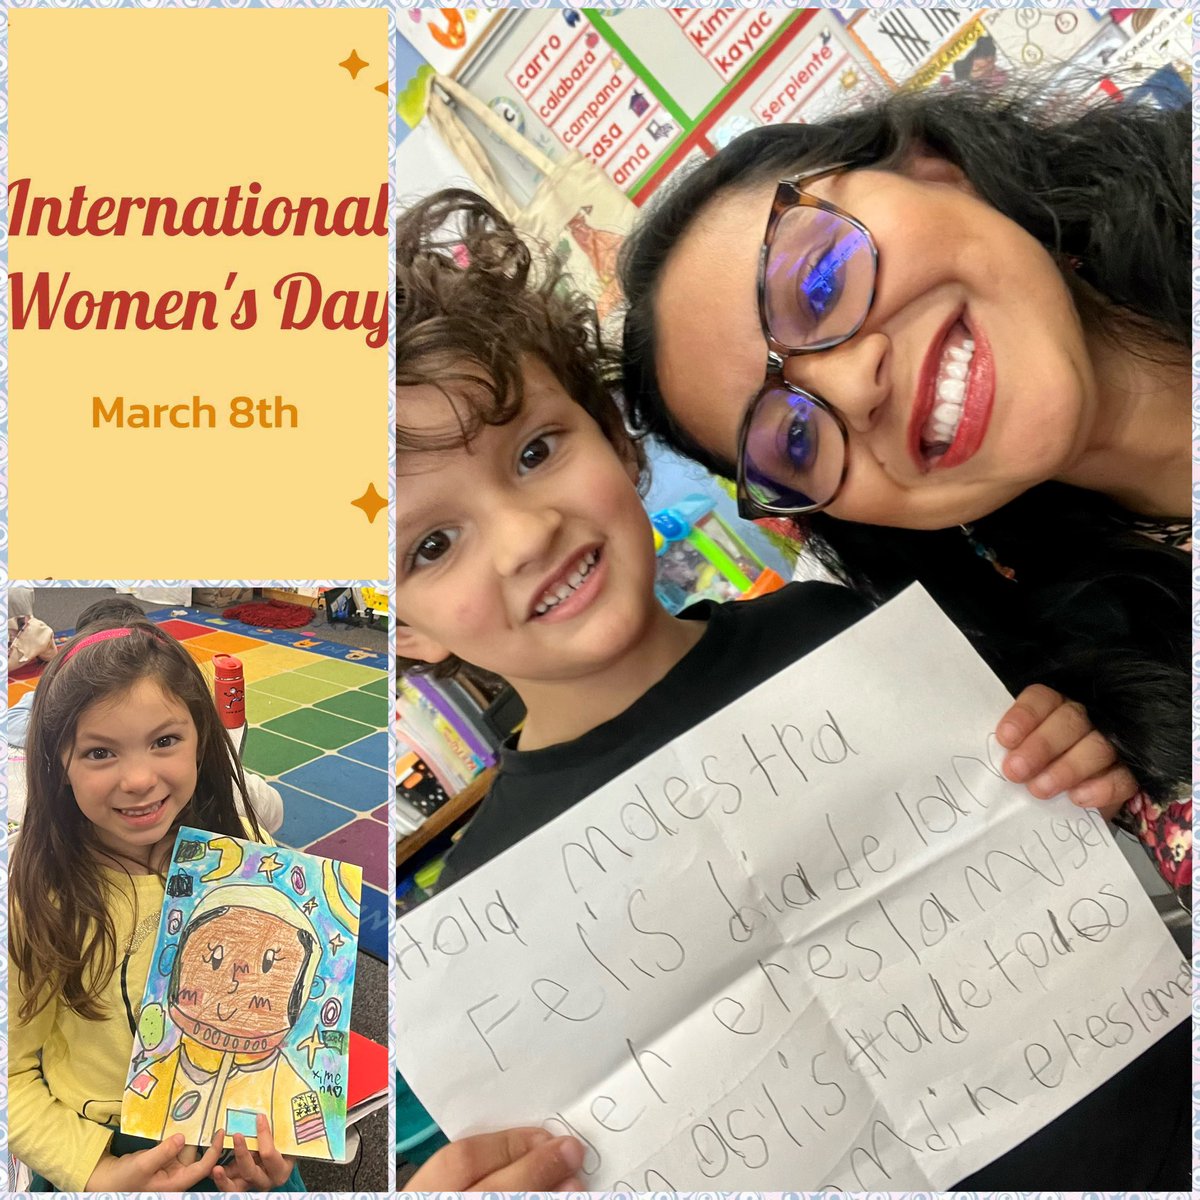 Happy International Women’s Day! We learned about incredible women trailblazers such as Mae Jemison. It was a lovely surprise to receive a letter from a student to celebrate the day!#alwaysalobo #youbelongCV @BostoniaGlobal @CajonValleyUSD @MtraRamosR @Danya_BGlobal @NerelWinter